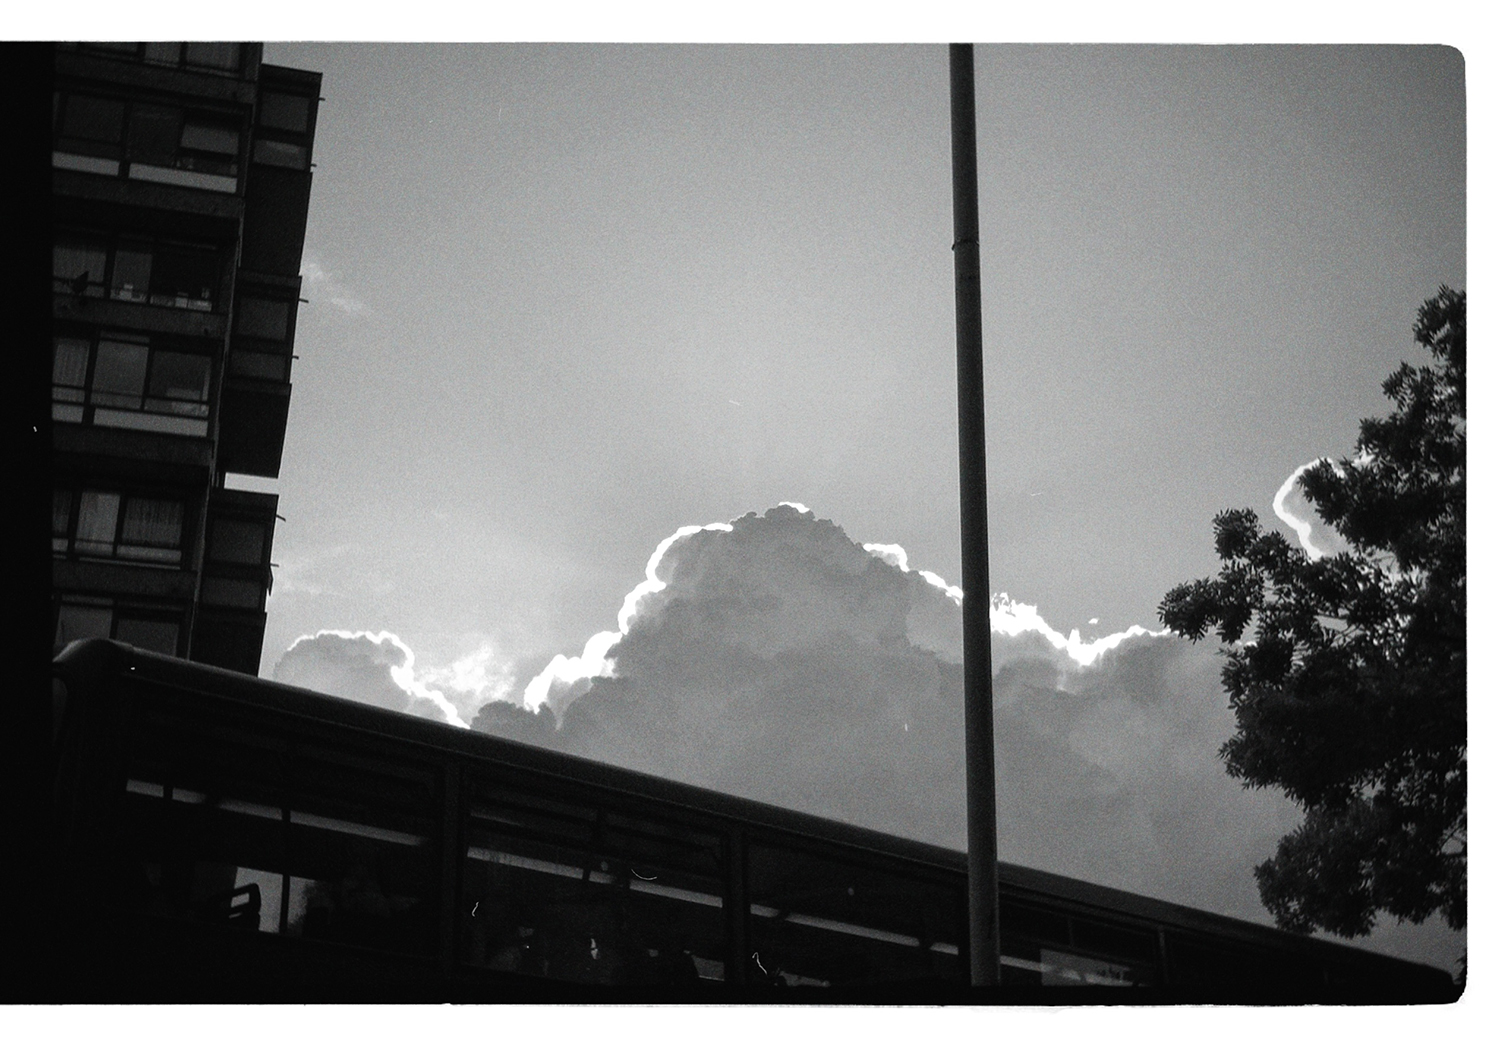 Every Cloud has a Silver Lining - black and white